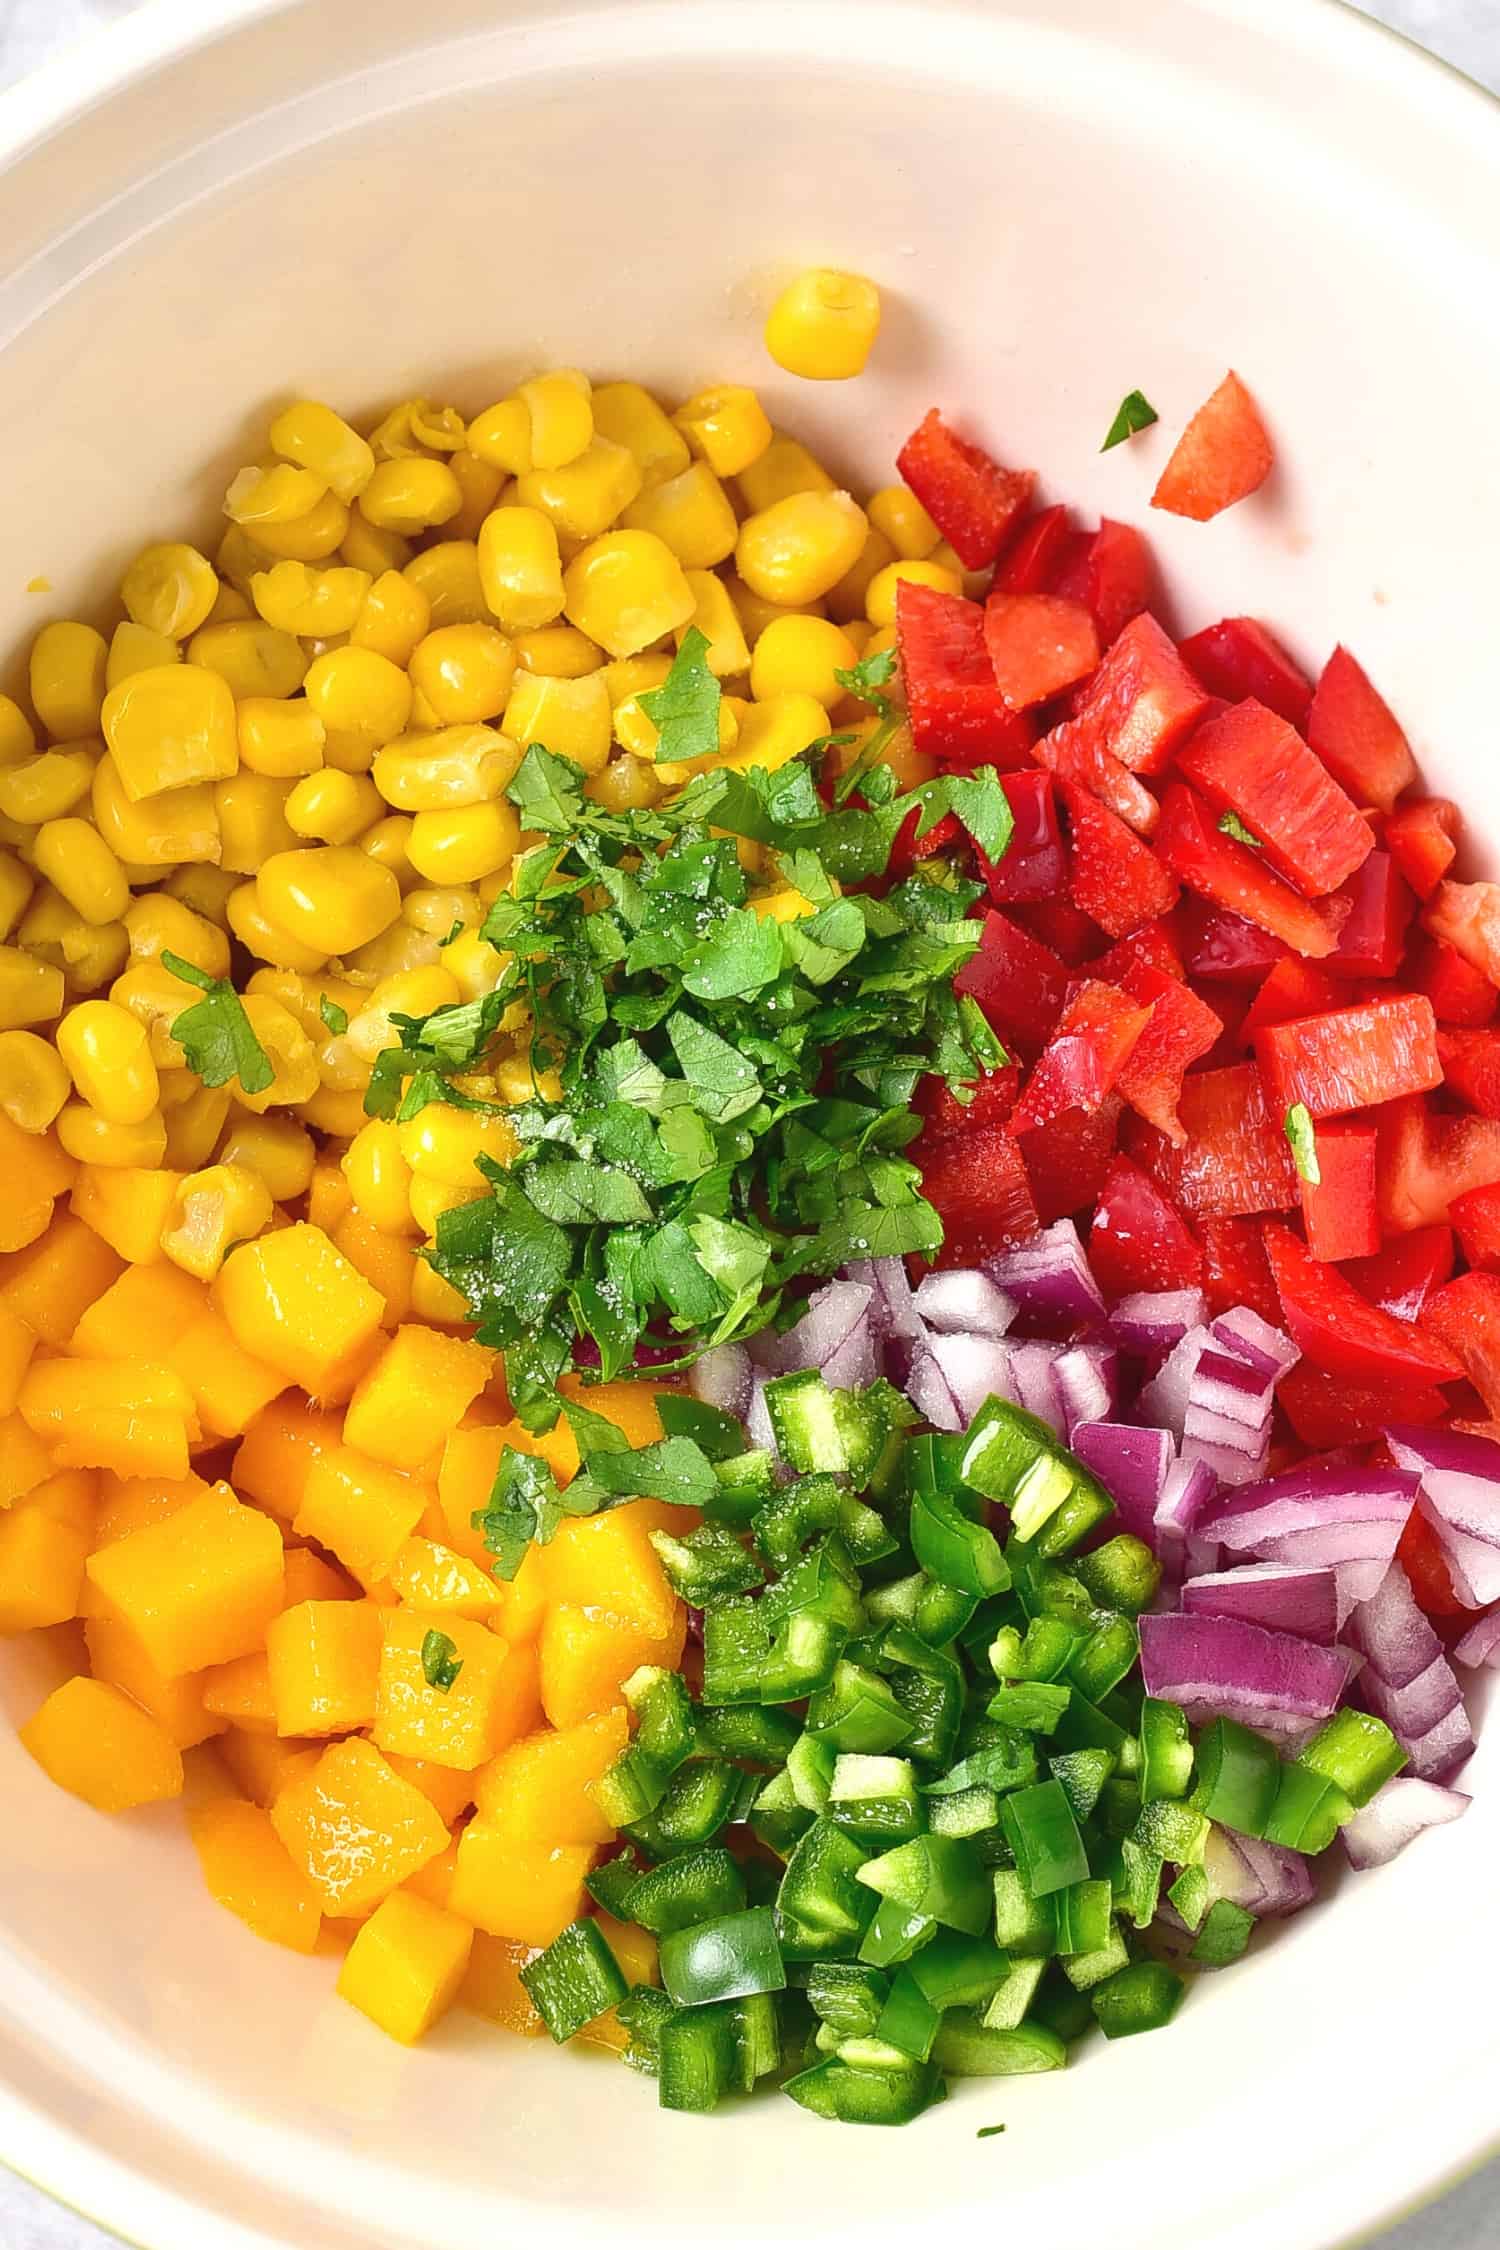 Colorful diced veggies in a bowl.